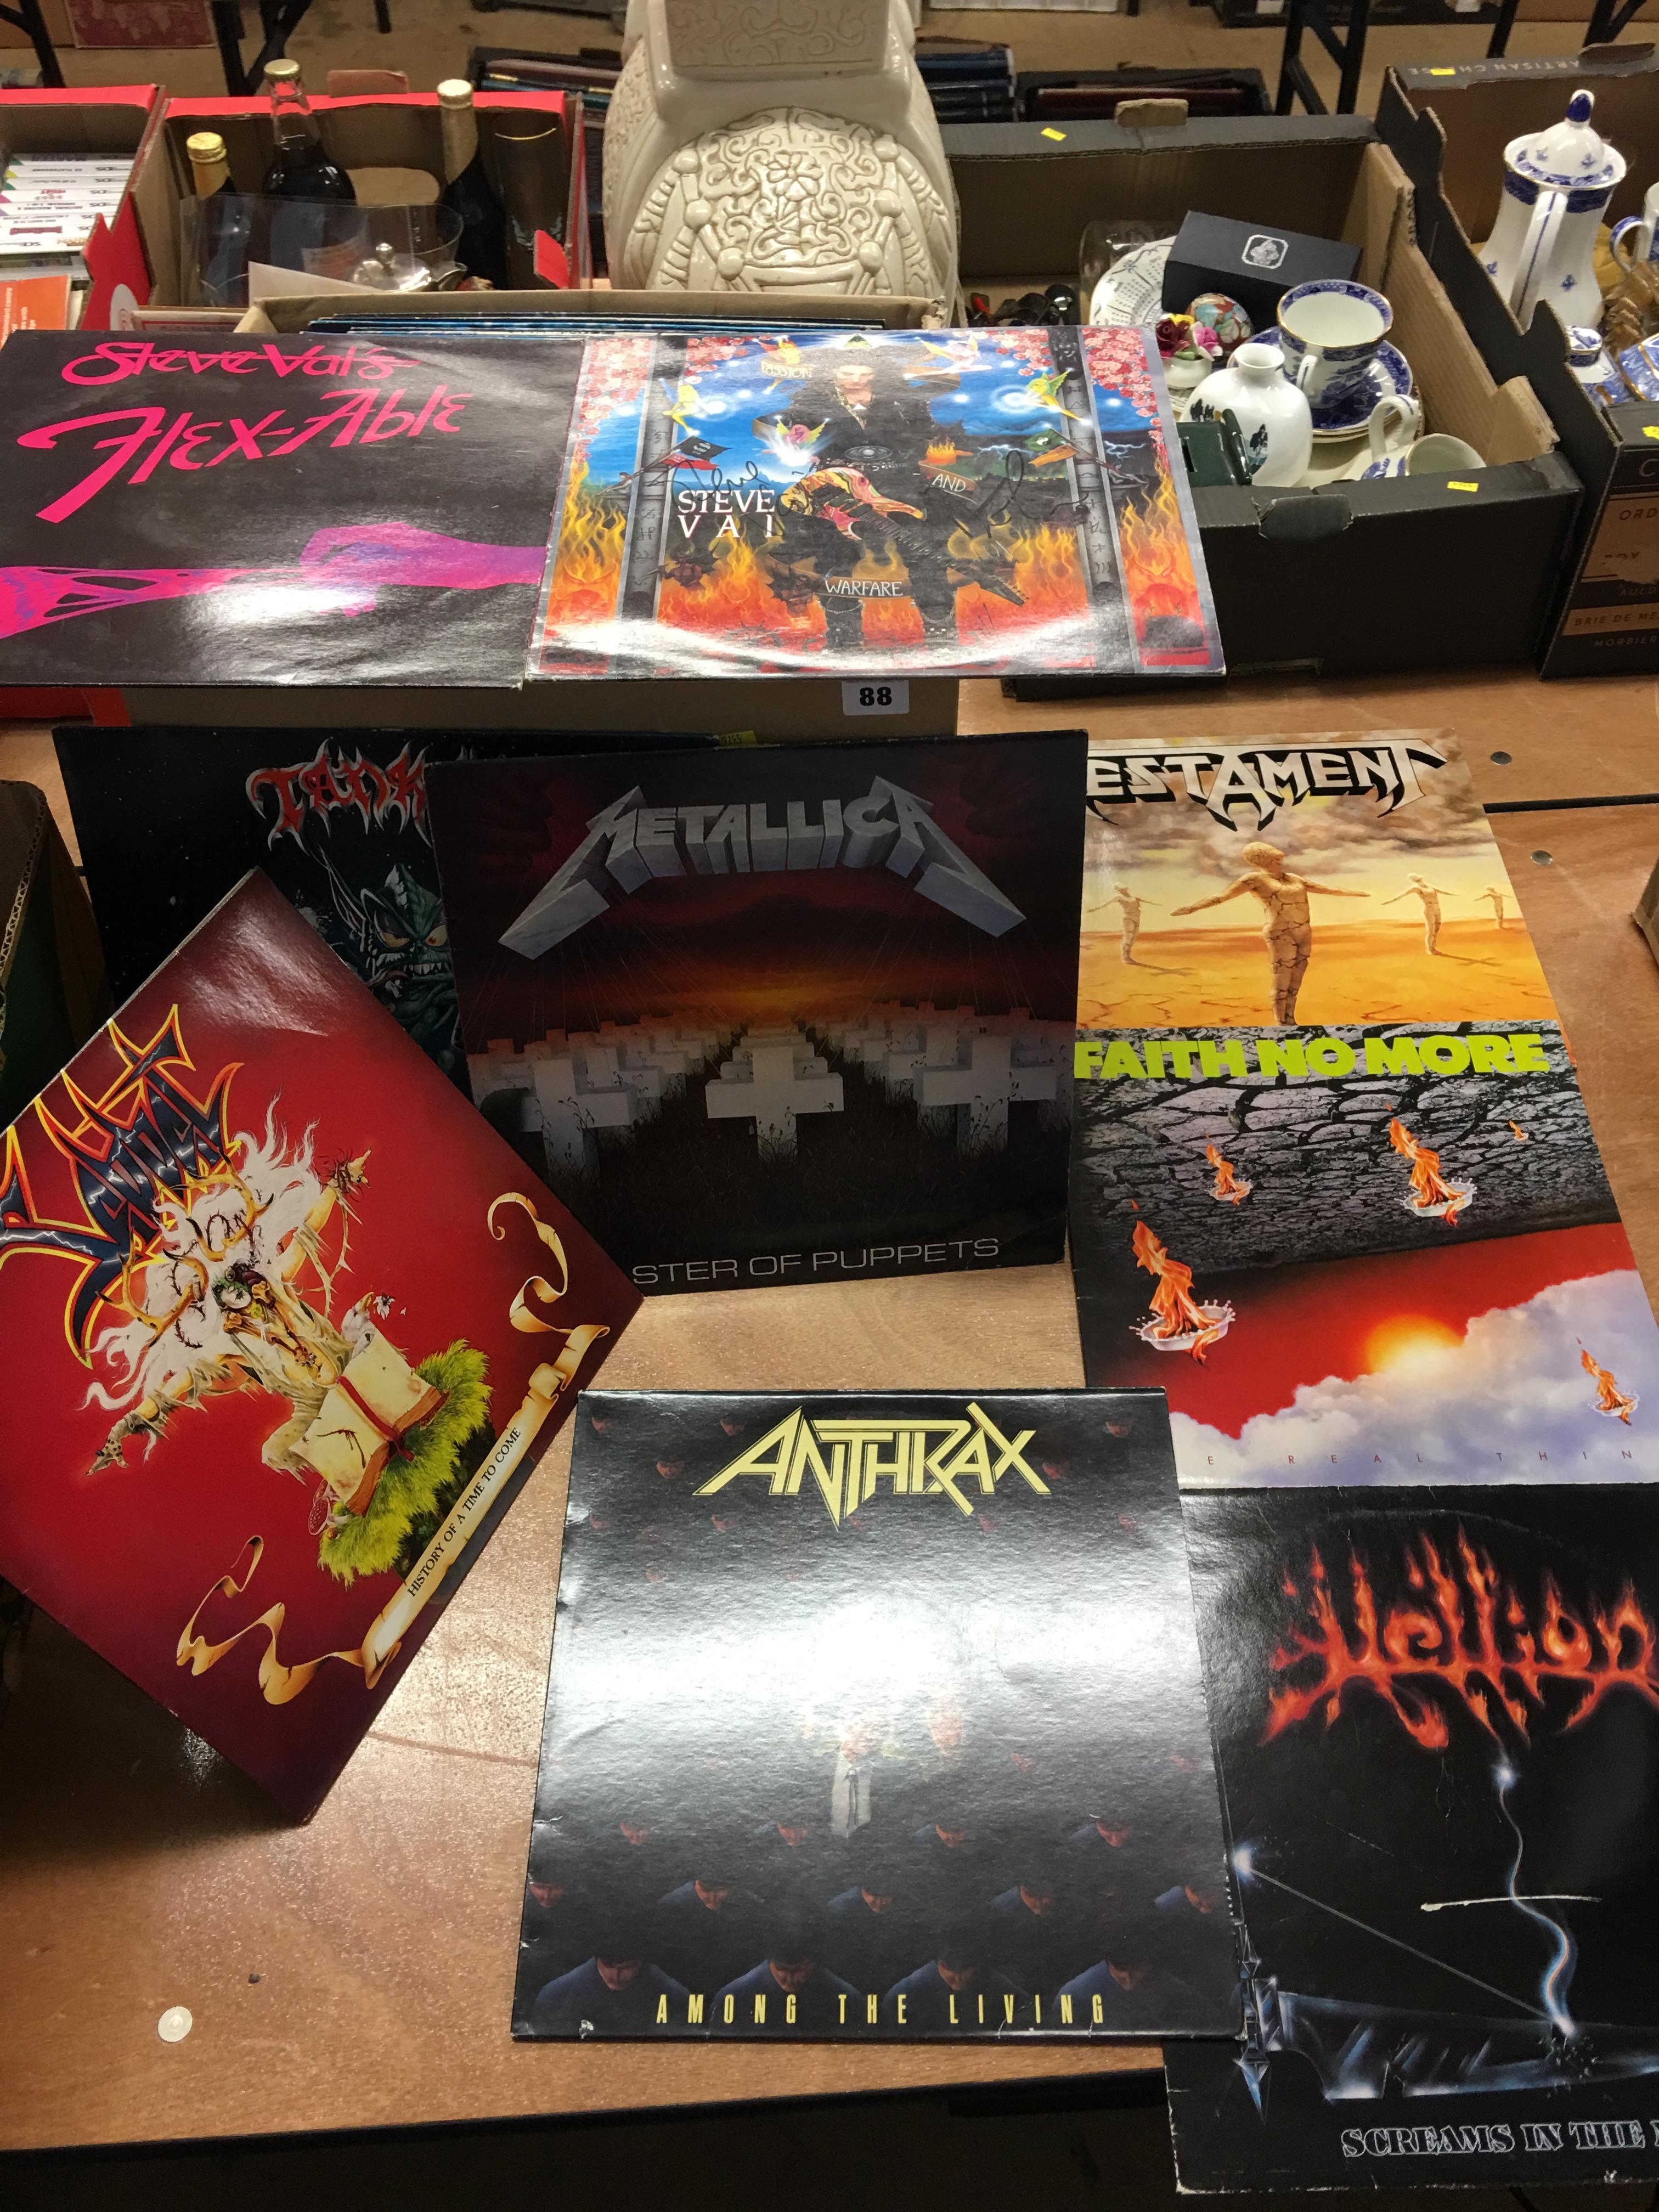 A box of heavy metal vinyl records, including a signed 'Steve Vai' album - Image 4 of 12